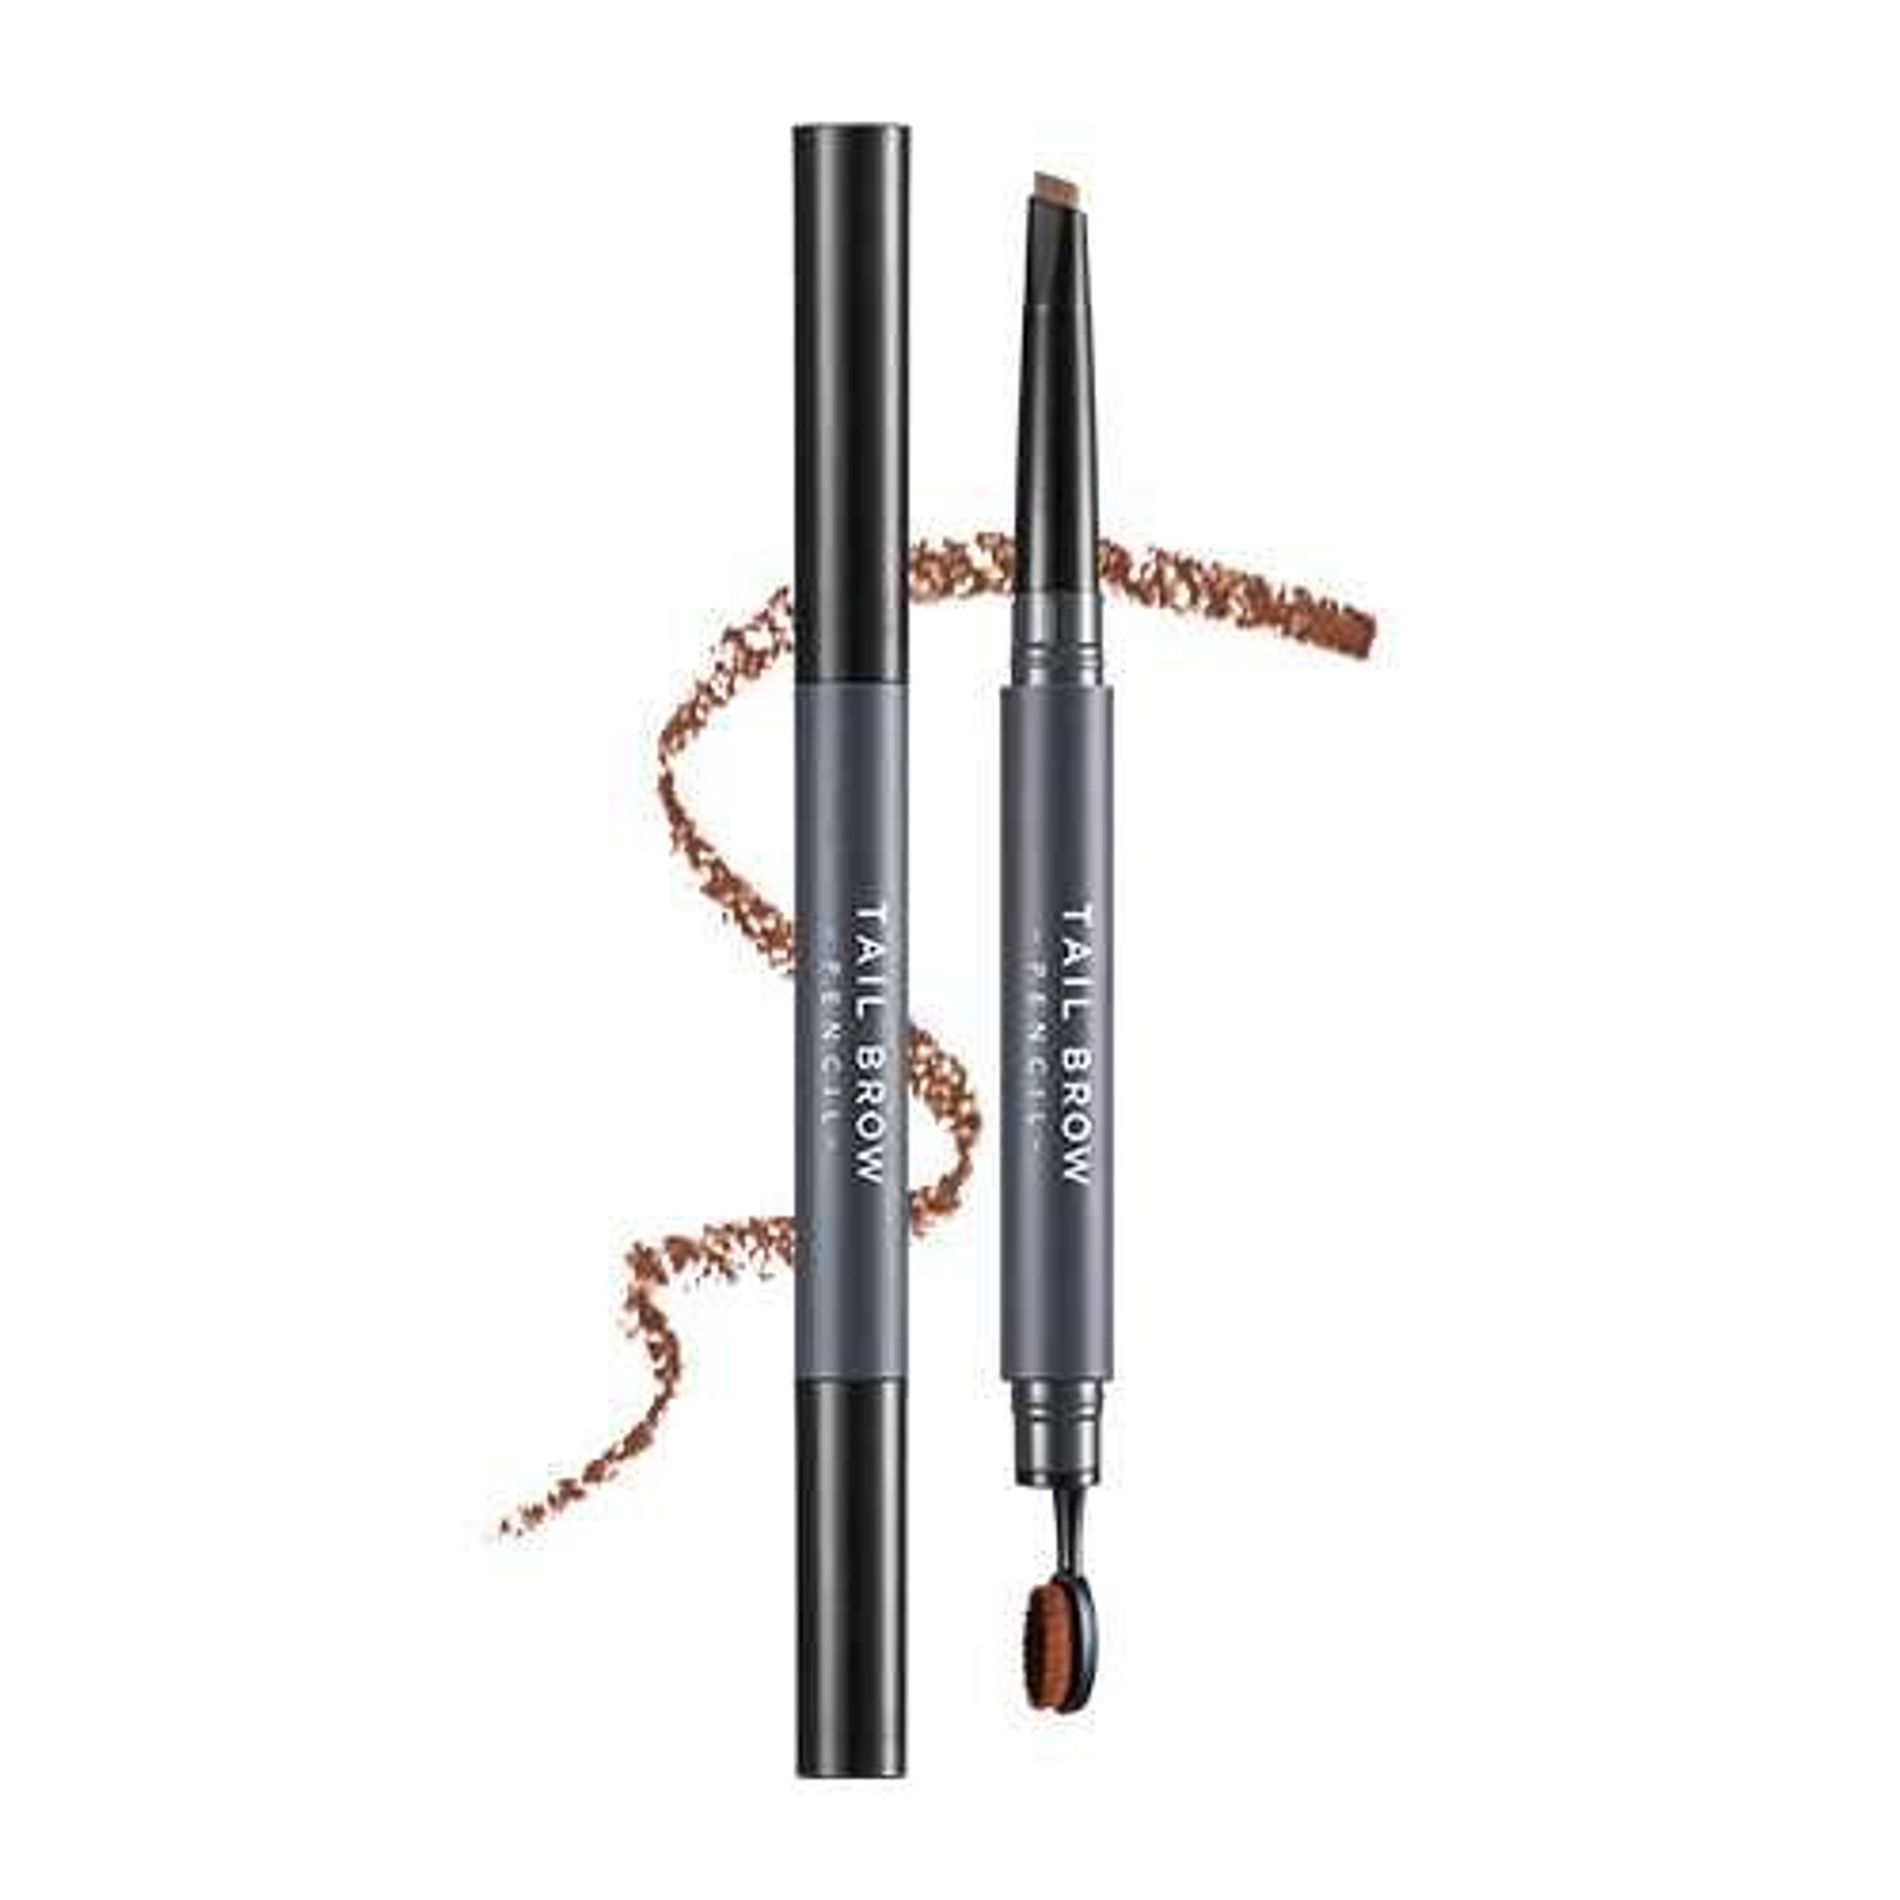 chi-chan-may-a-pieu-tail-brow-pencil-red-brown-0-3g-5